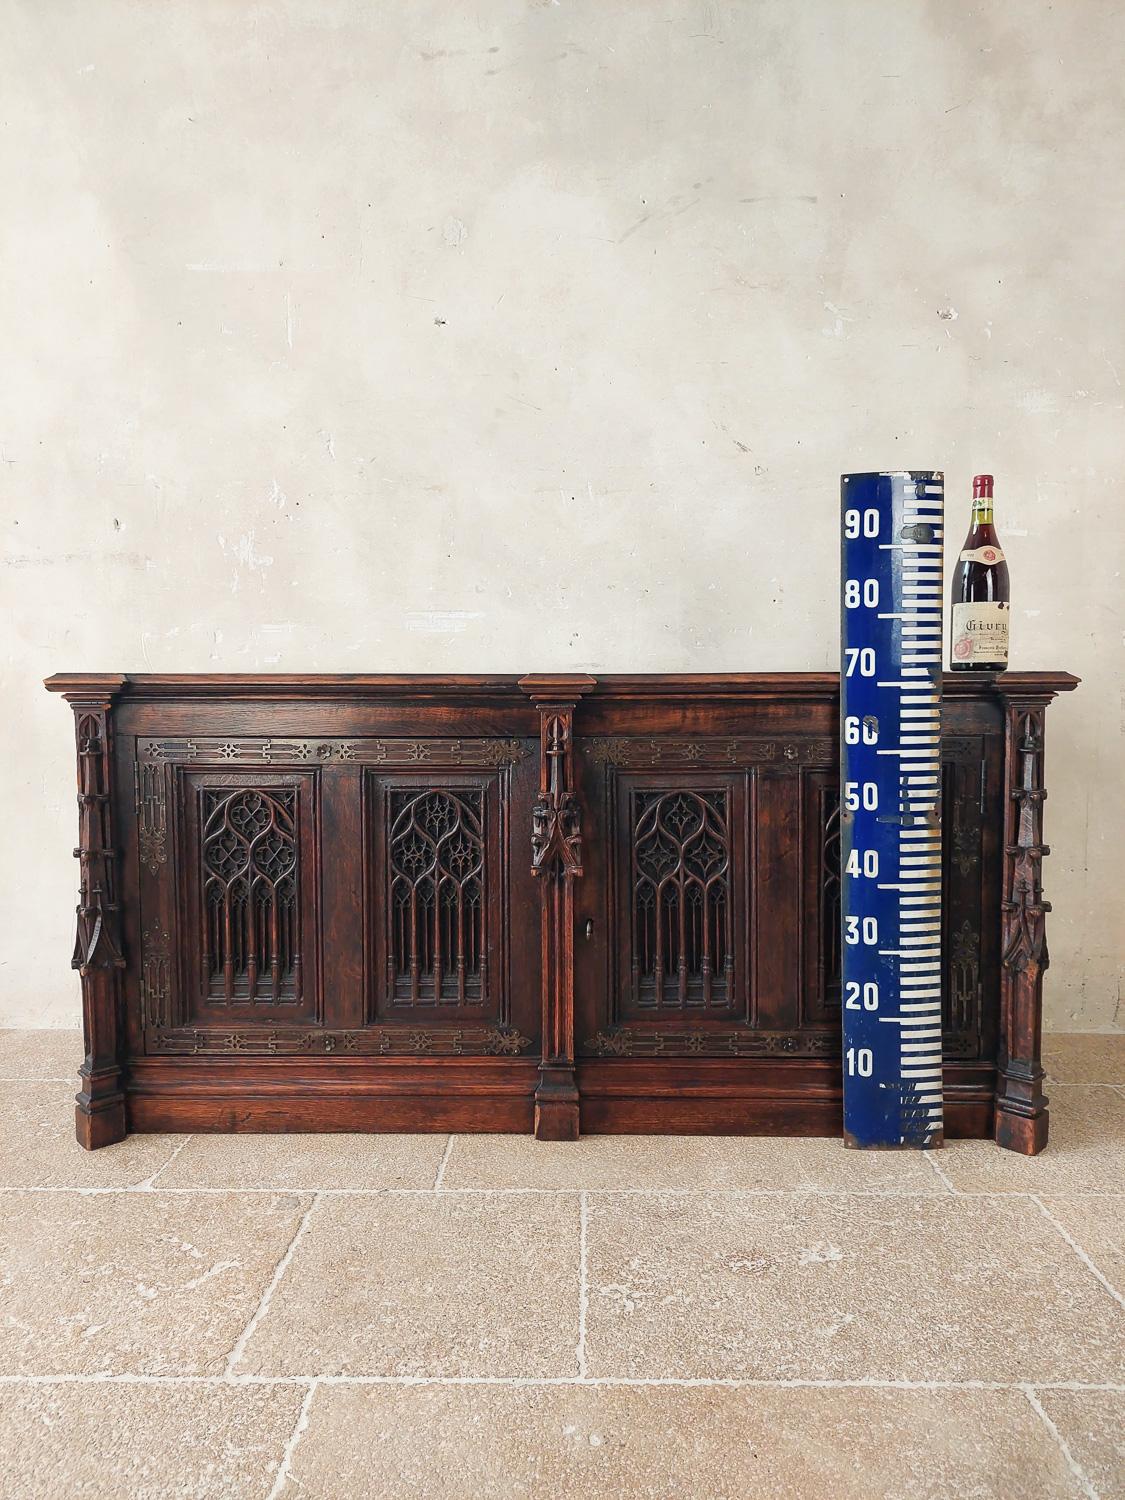 A very attractive 19th century neo-gothic french chest or cabinet made of oak with hand carved decorations. Beautifully carved with gothic details as pointed arches, rosettes, columns and linnenfold panels. The front has 2 doors and and the top can